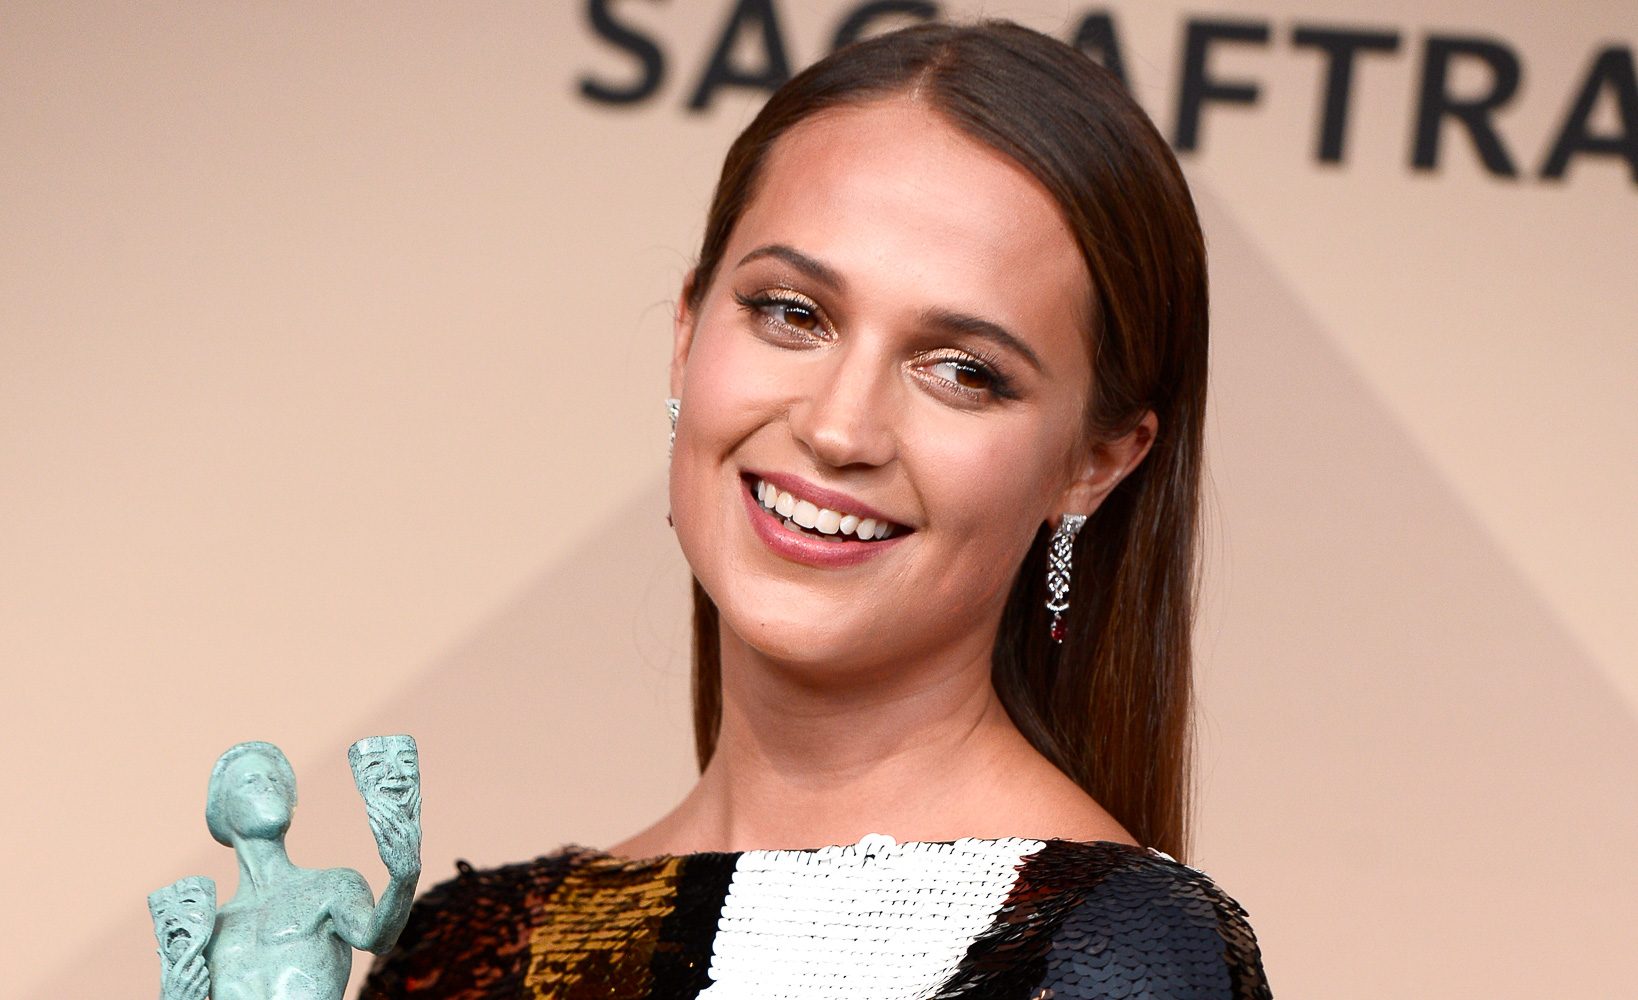 Oscars 2016: Alicia Vikander wins Best Supporting Actress